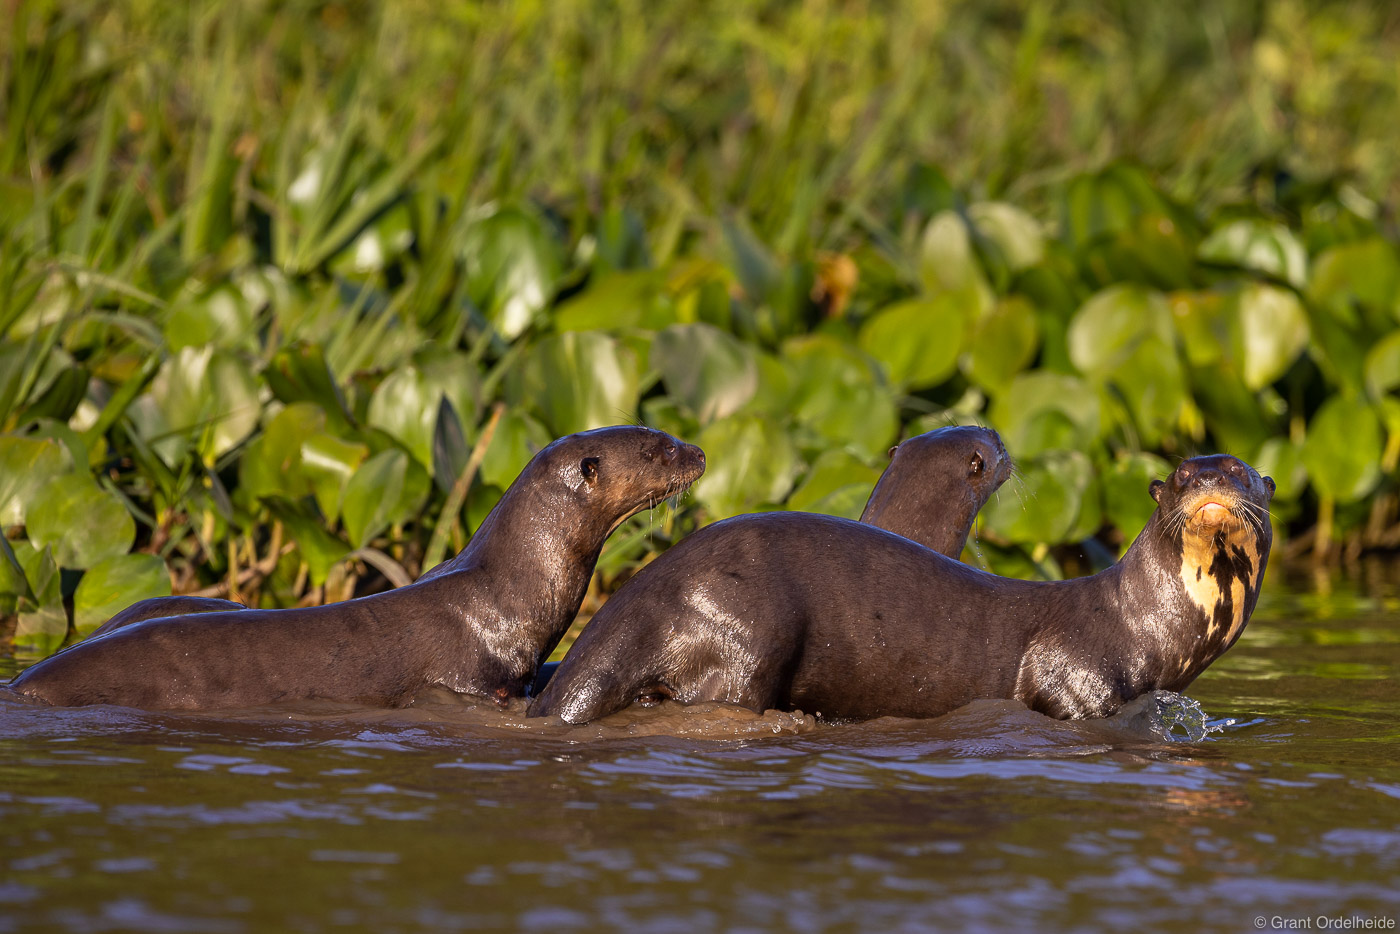 A group of giant river otters in Brazil's Pantanal.